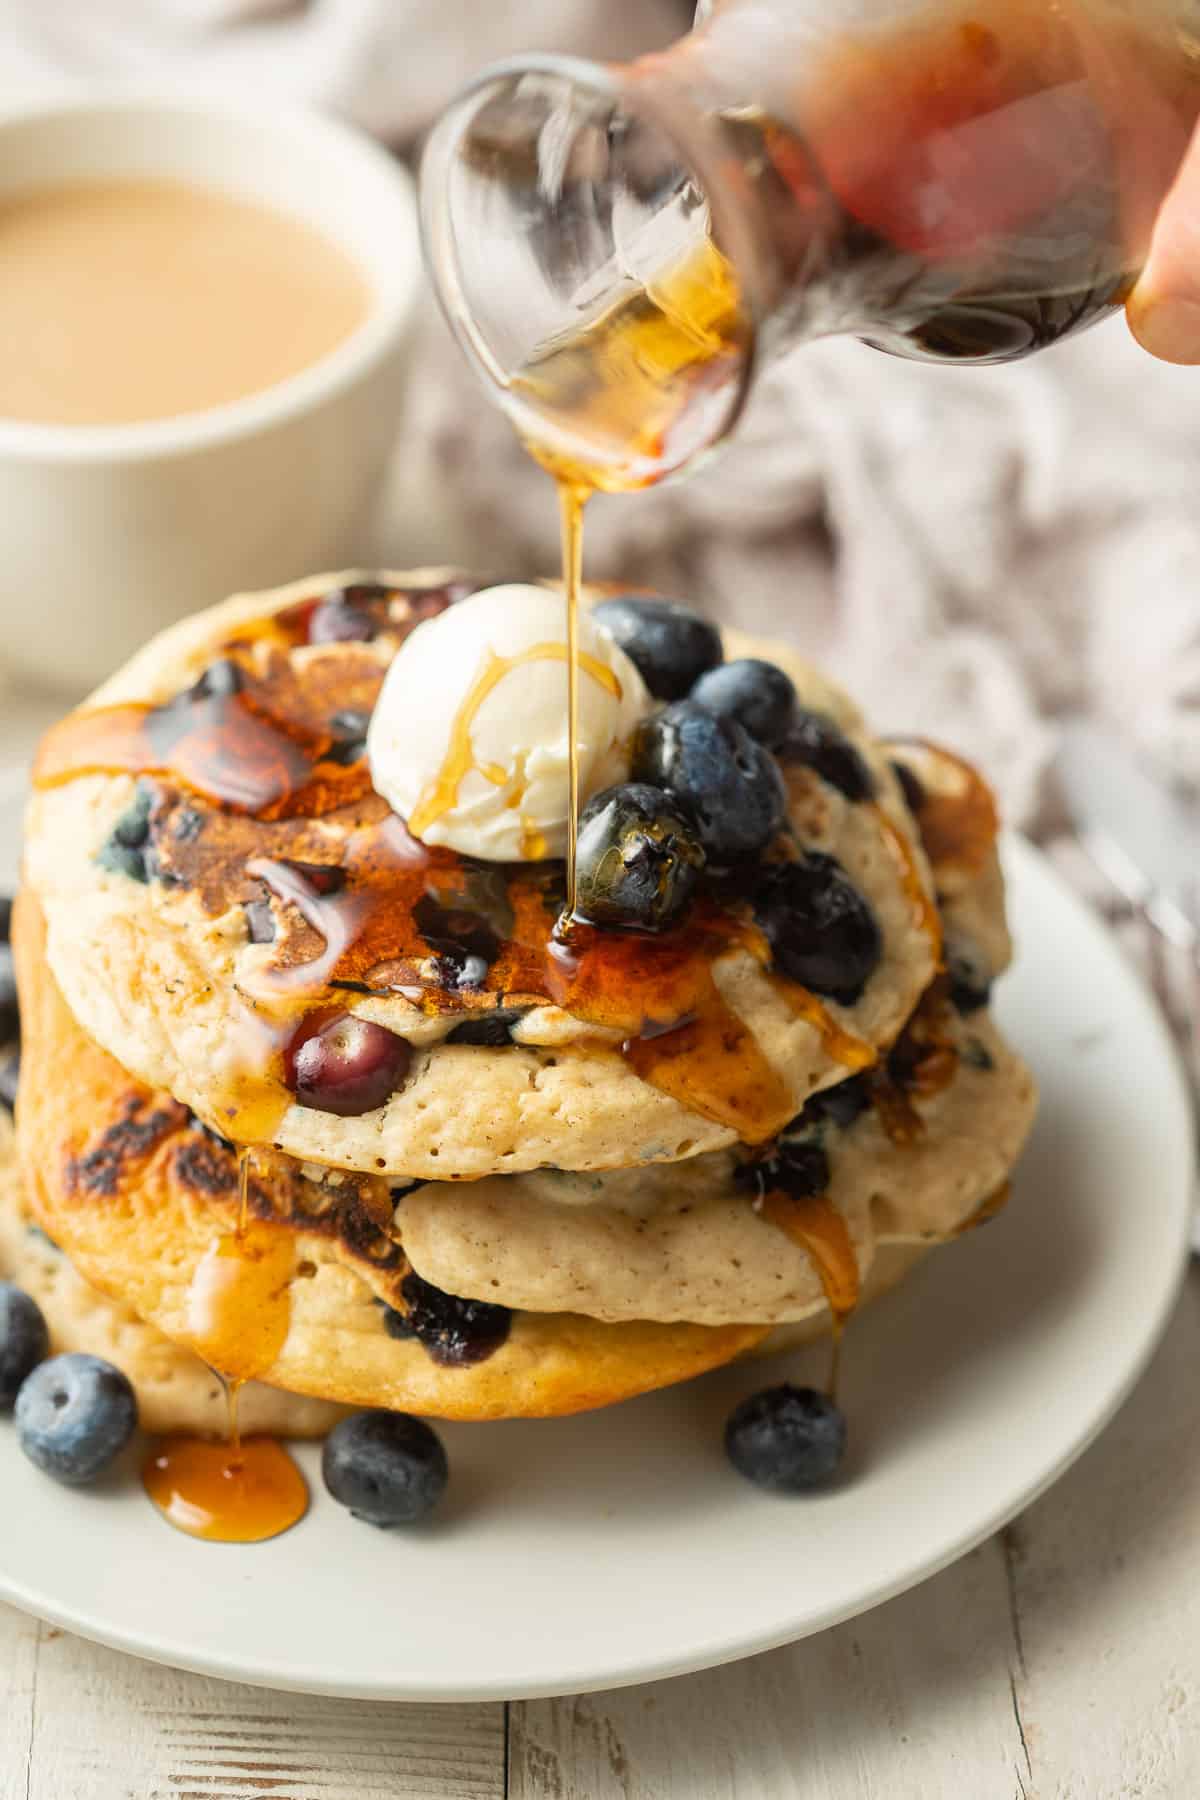 Syrup being drizzled over a stack of Vegan Blueberry Pancakes.